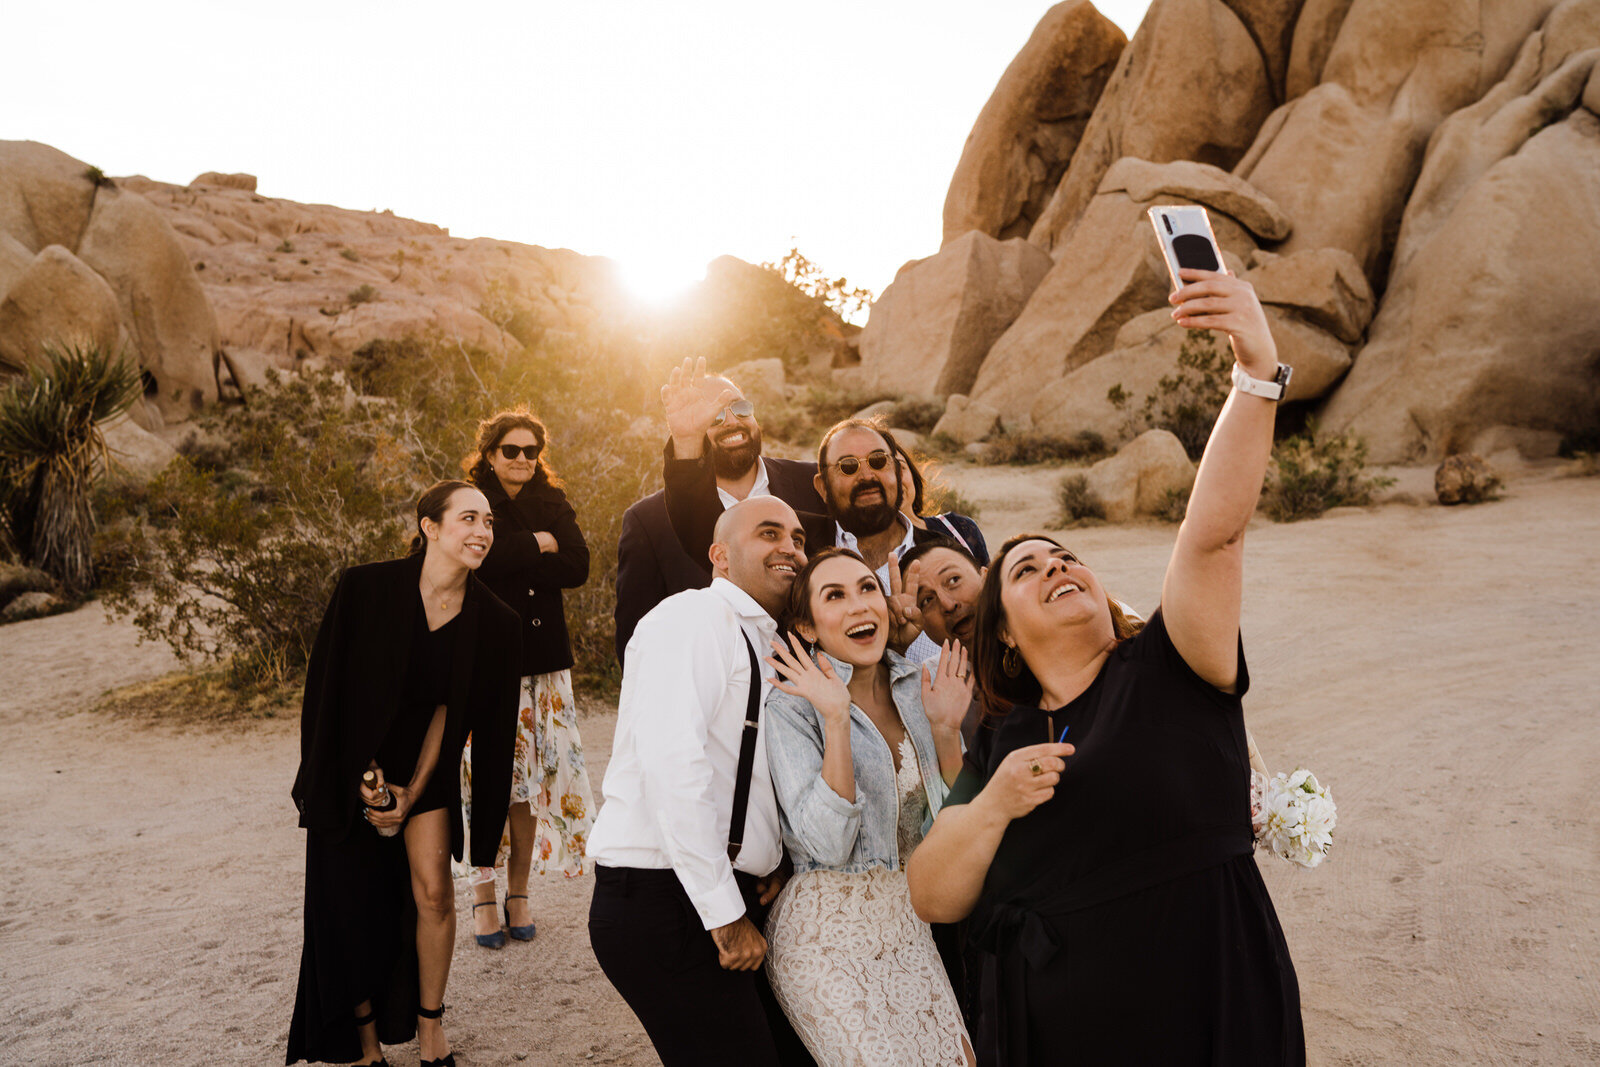 group selfie with elopement officiant Marie Burns Holzer and family after Joshua Tree National Park ceremony | adventurous, fun, warm wedding photos by Kept Record | www.keptrecord.com